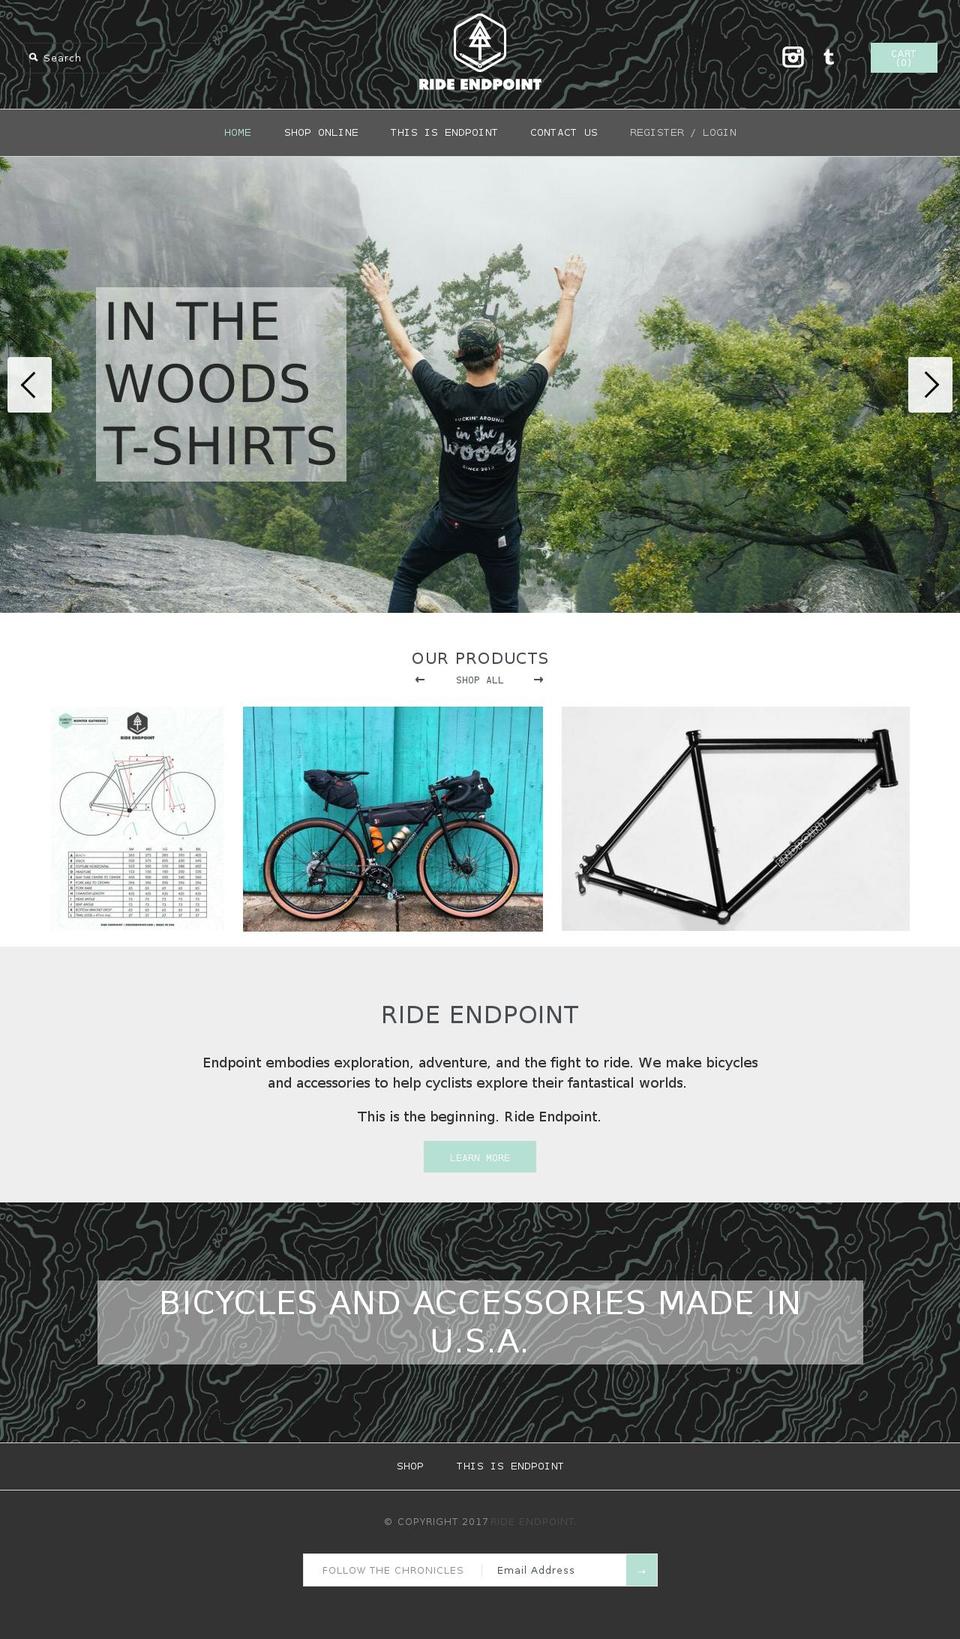 V Shopify theme site example rideendpoint.com